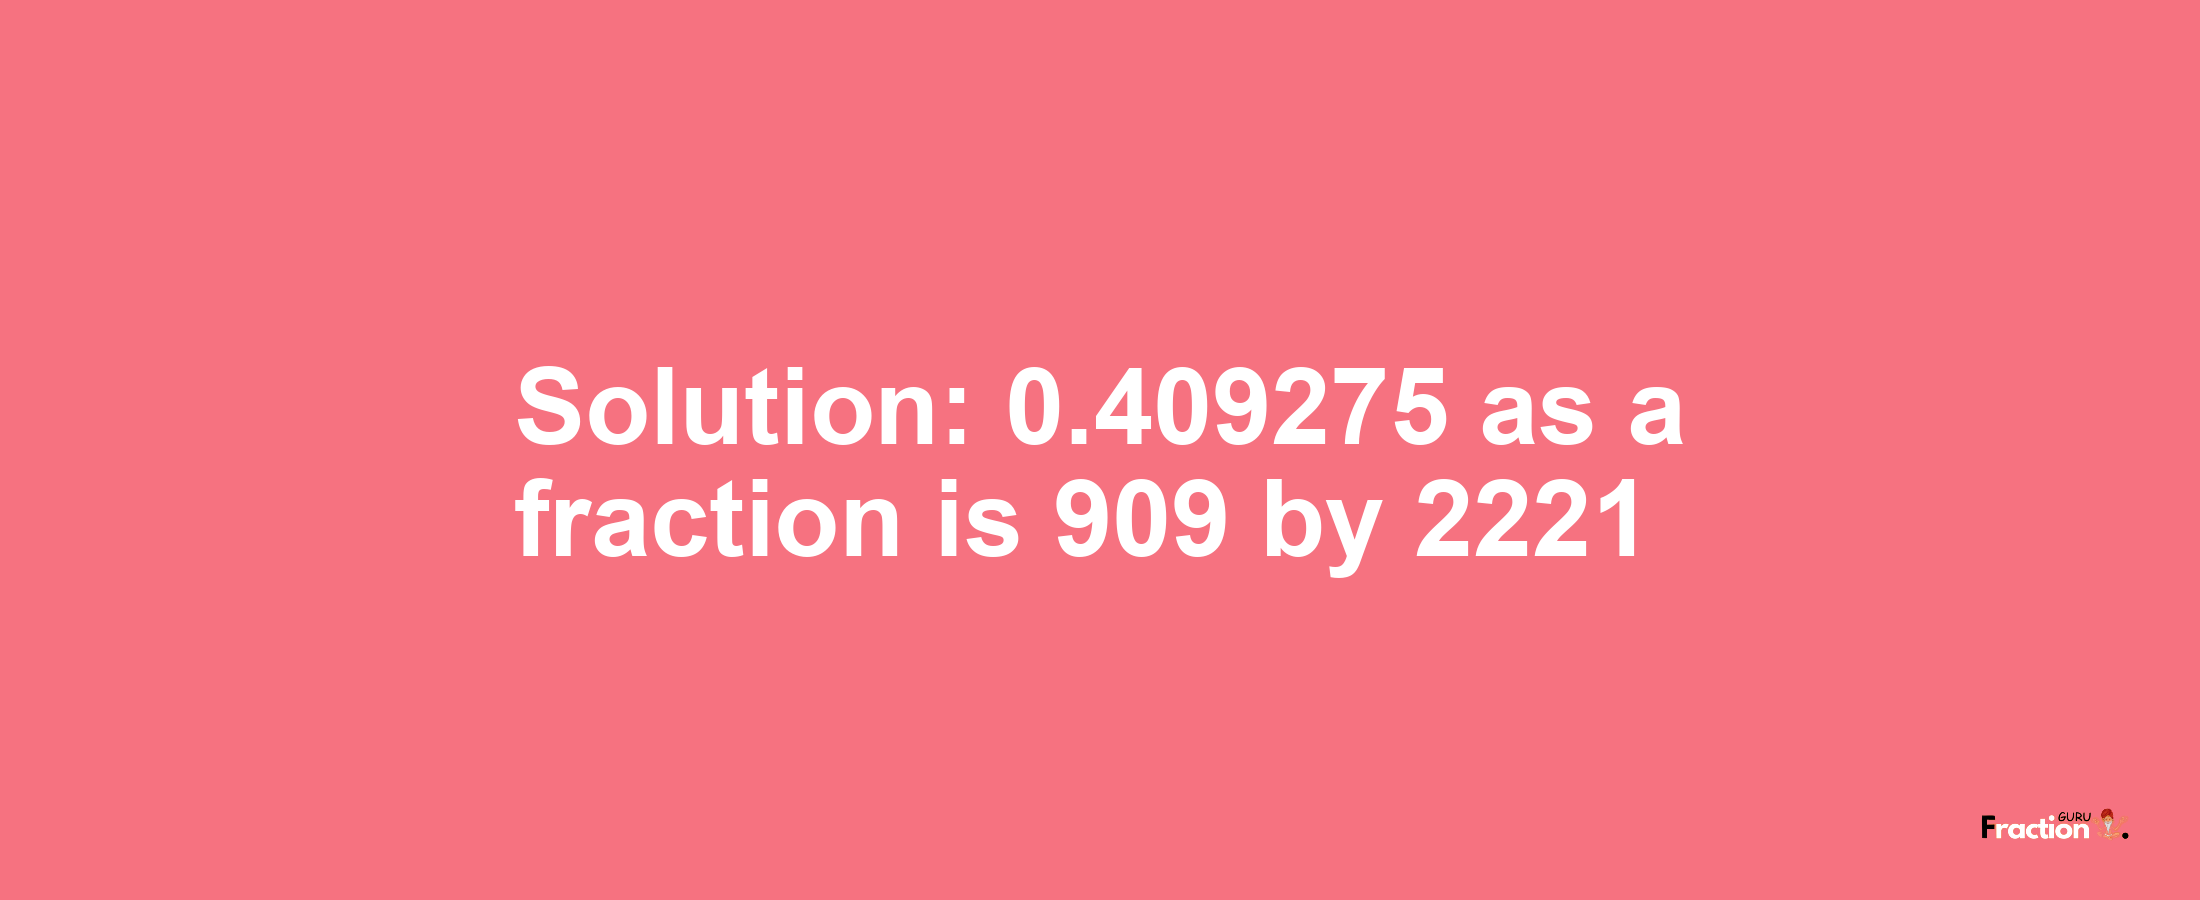 Solution:0.409275 as a fraction is 909/2221